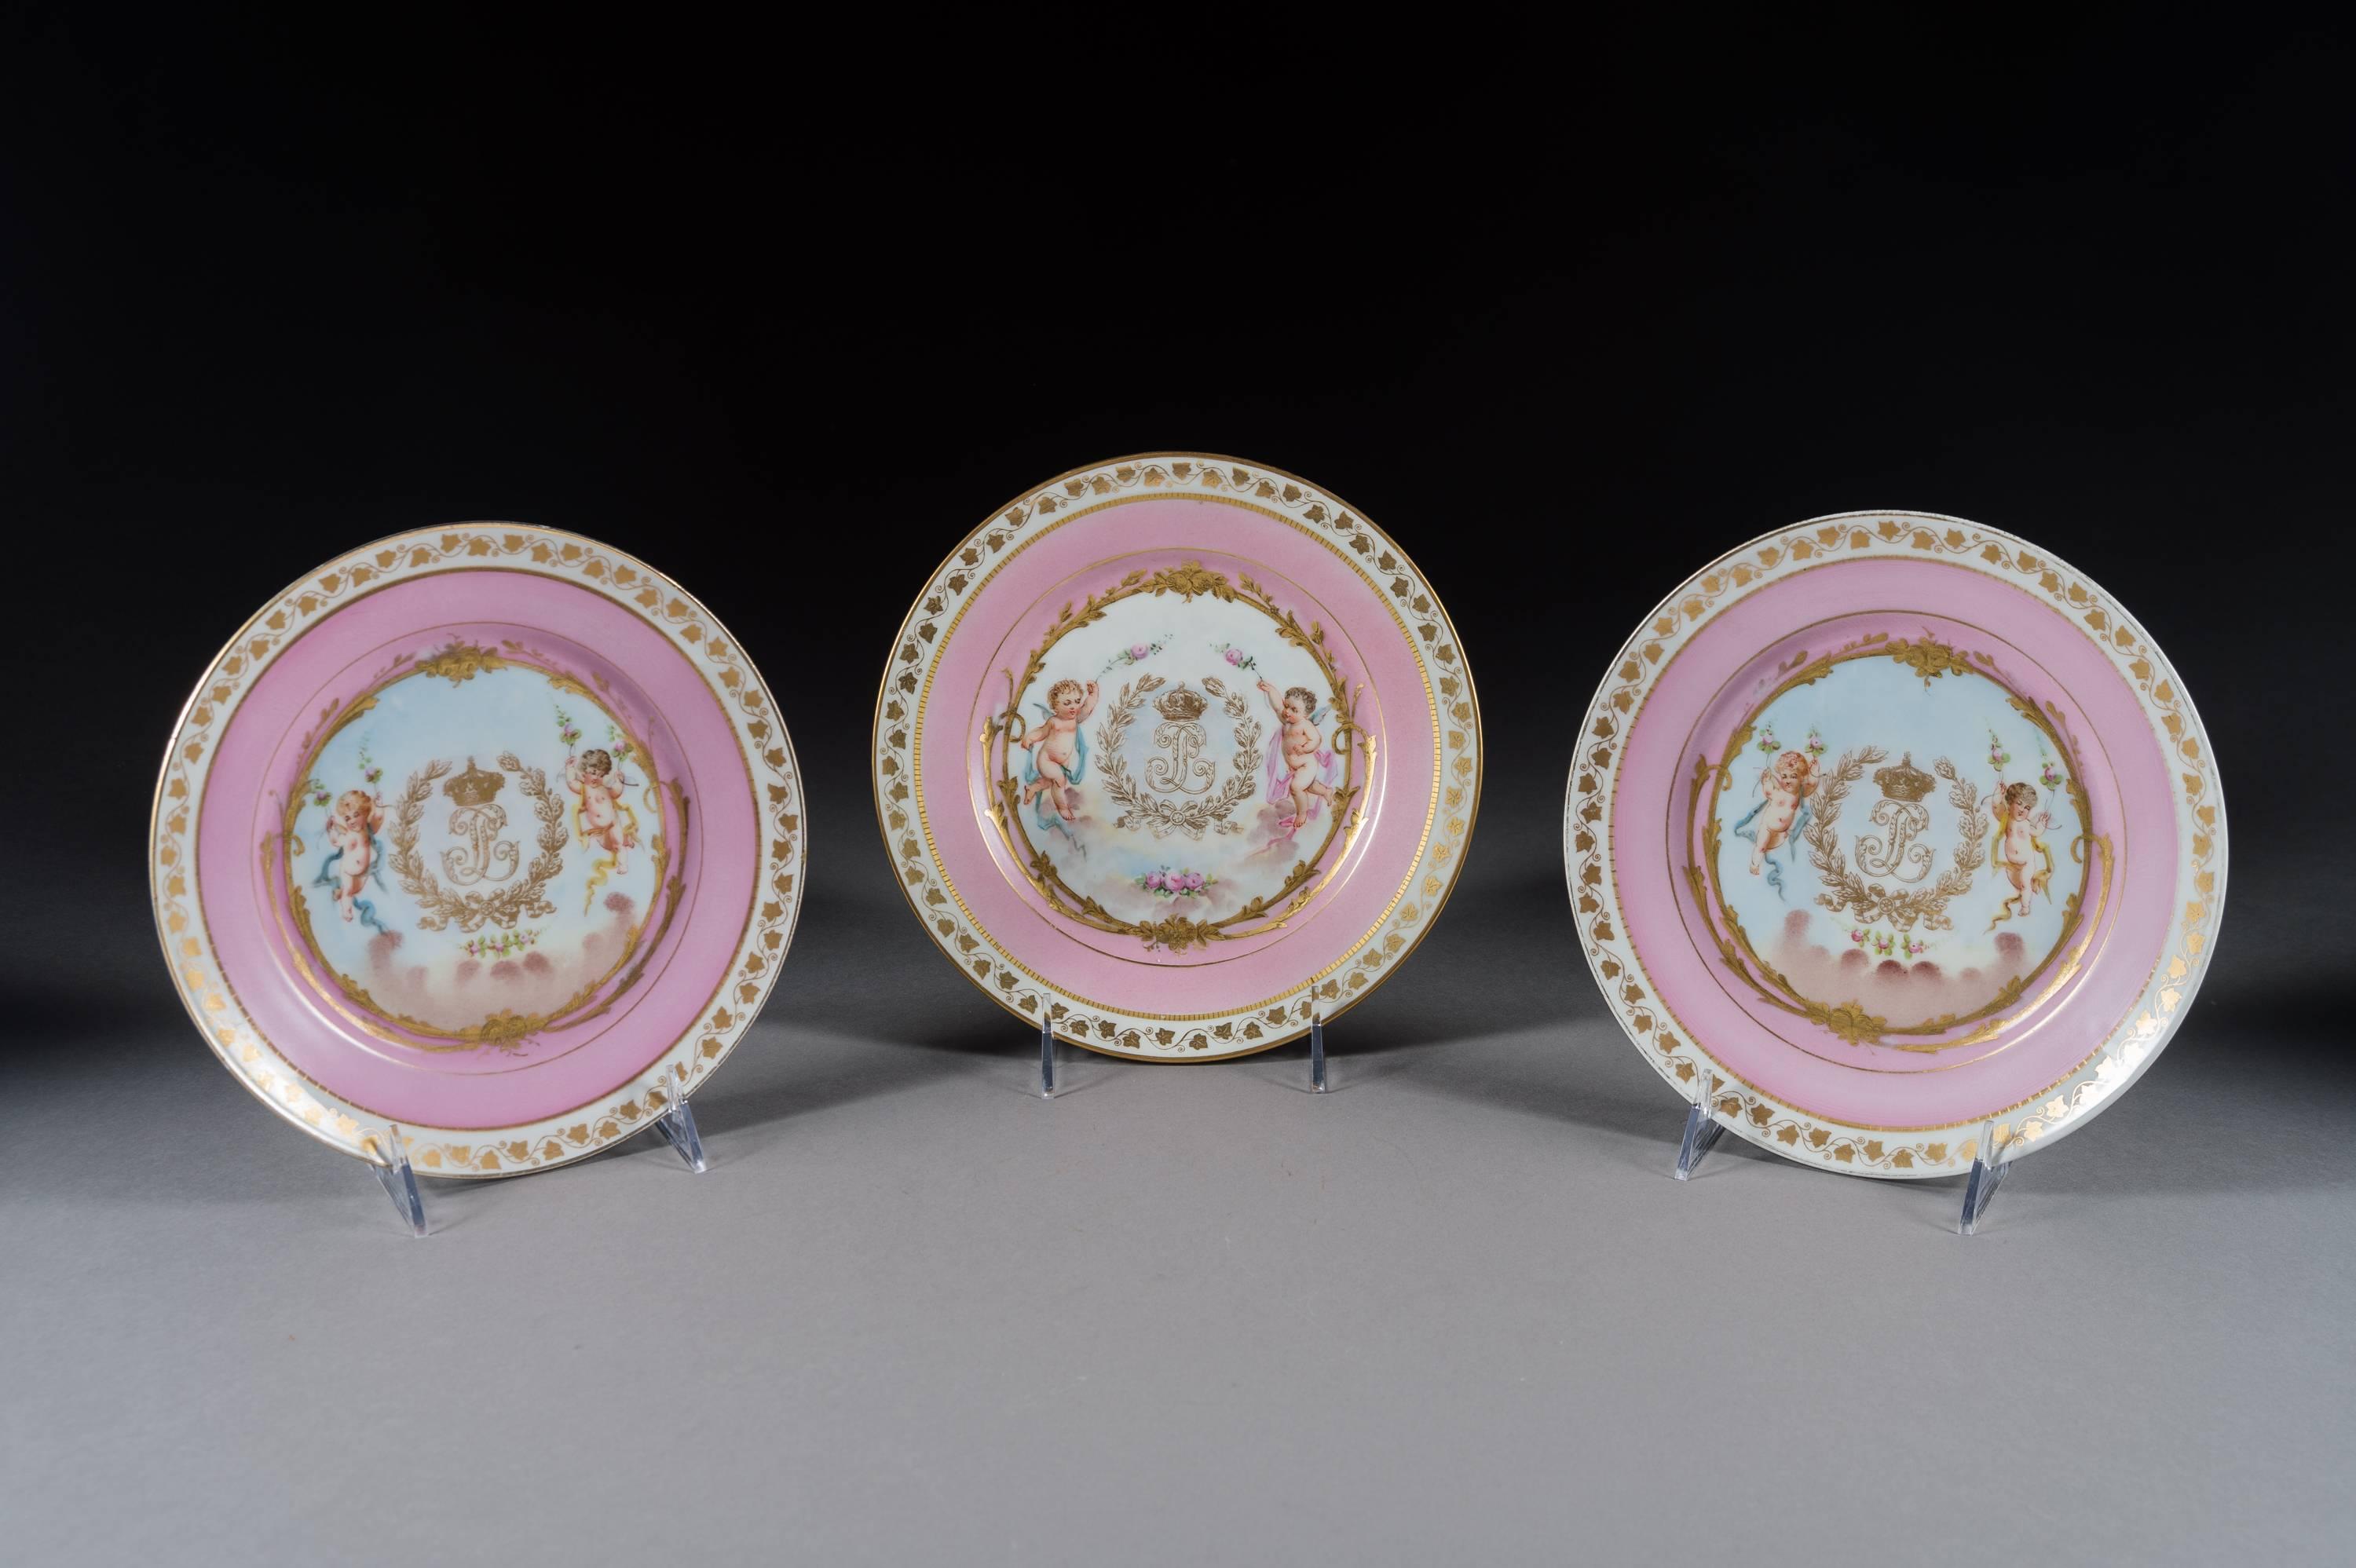 A very fine set of 12 French Sevres pink ground porcelain painted and jeweled plates. 

Each with a gold and pink border with a central painting depicting cherubs with a garland of flowers, with a gold royal coat of arms. 

Each signed with